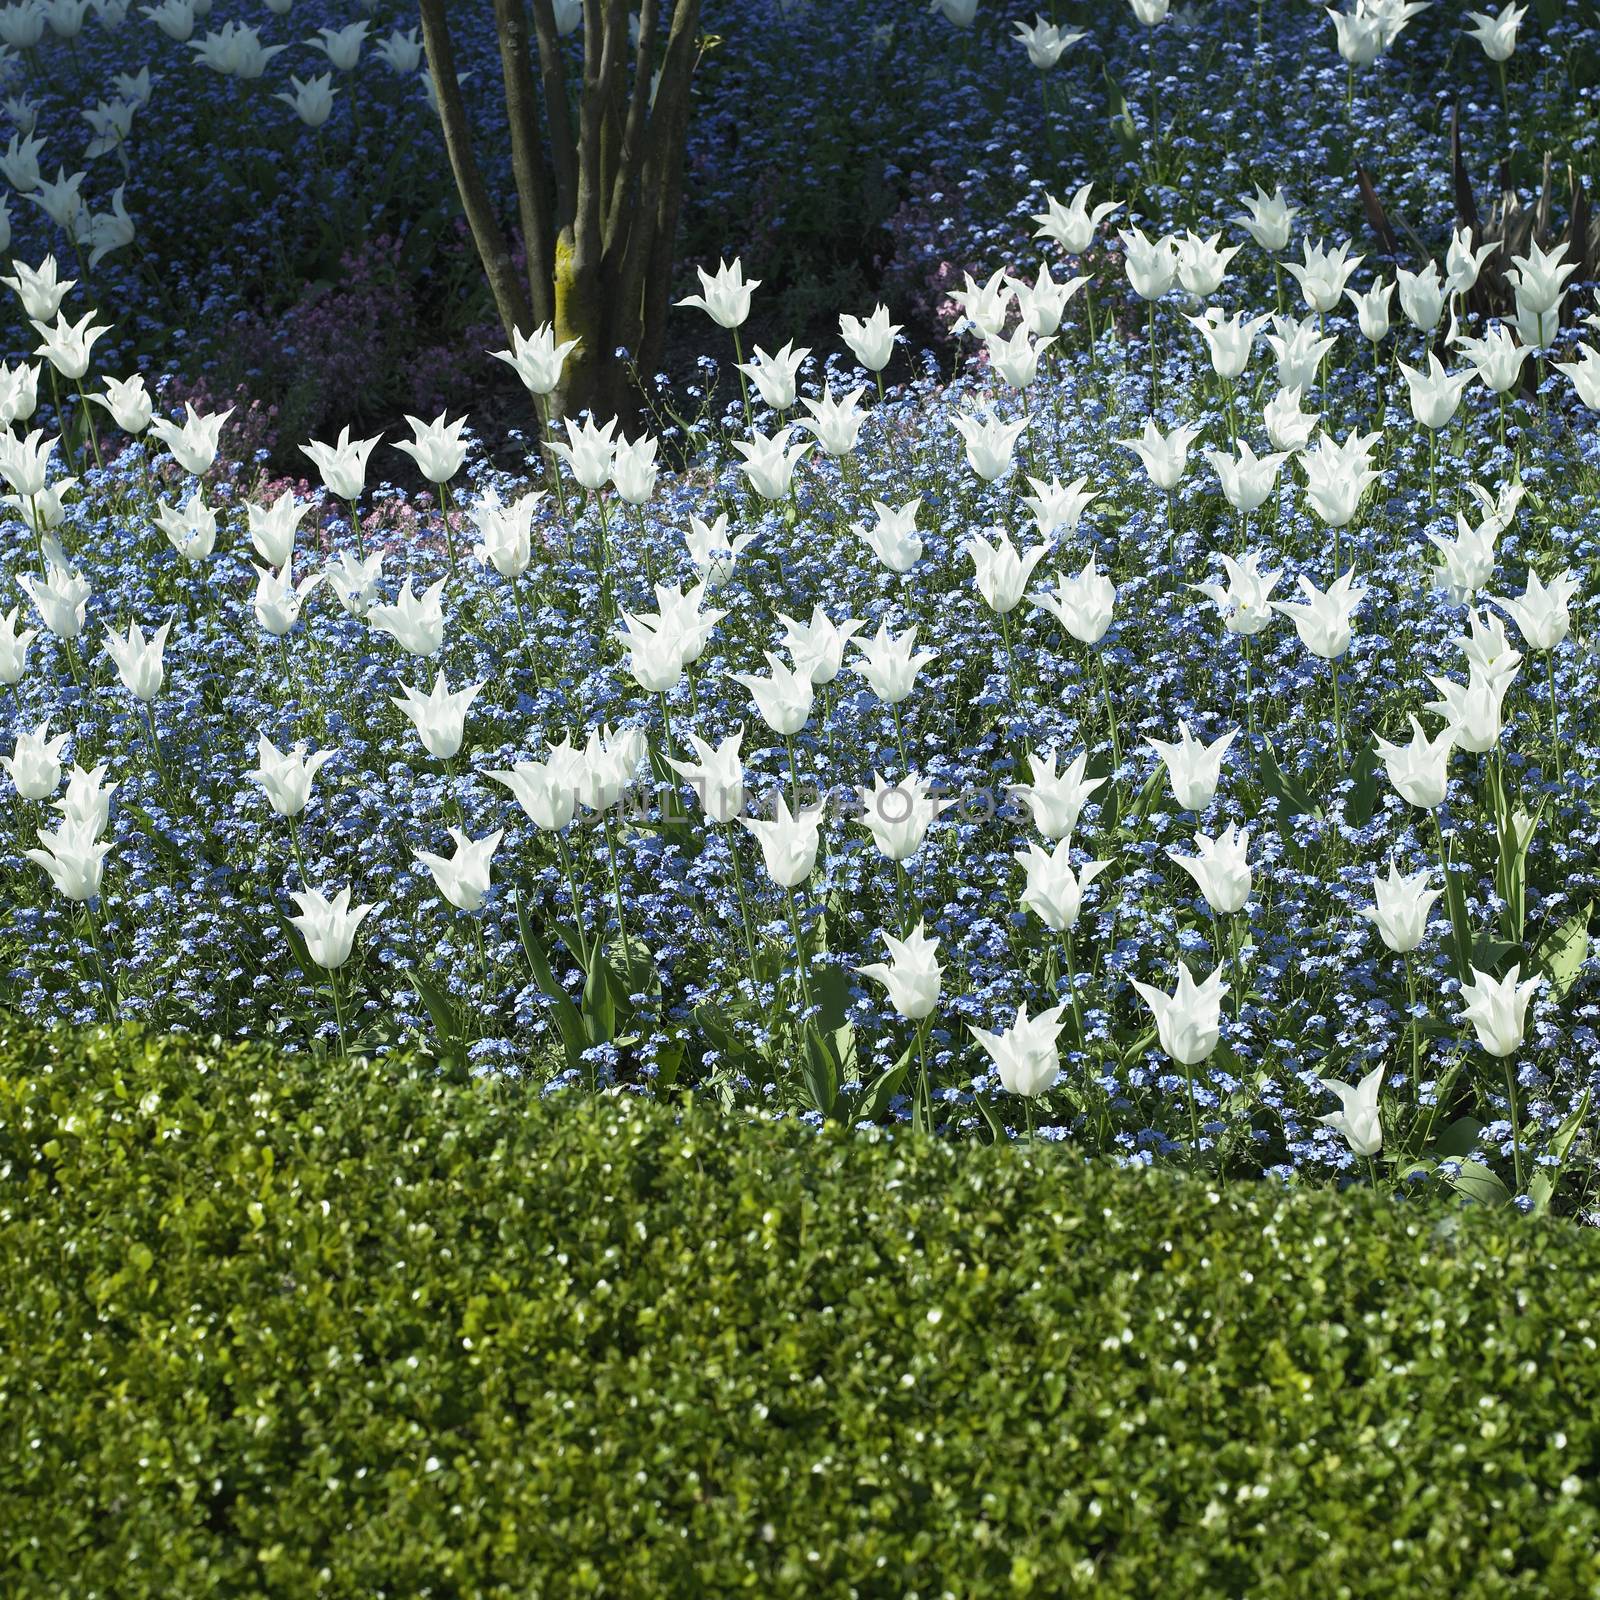 White tulips wide open sprouting up between tiny blue flowers surrounding a small tree near a hedge 